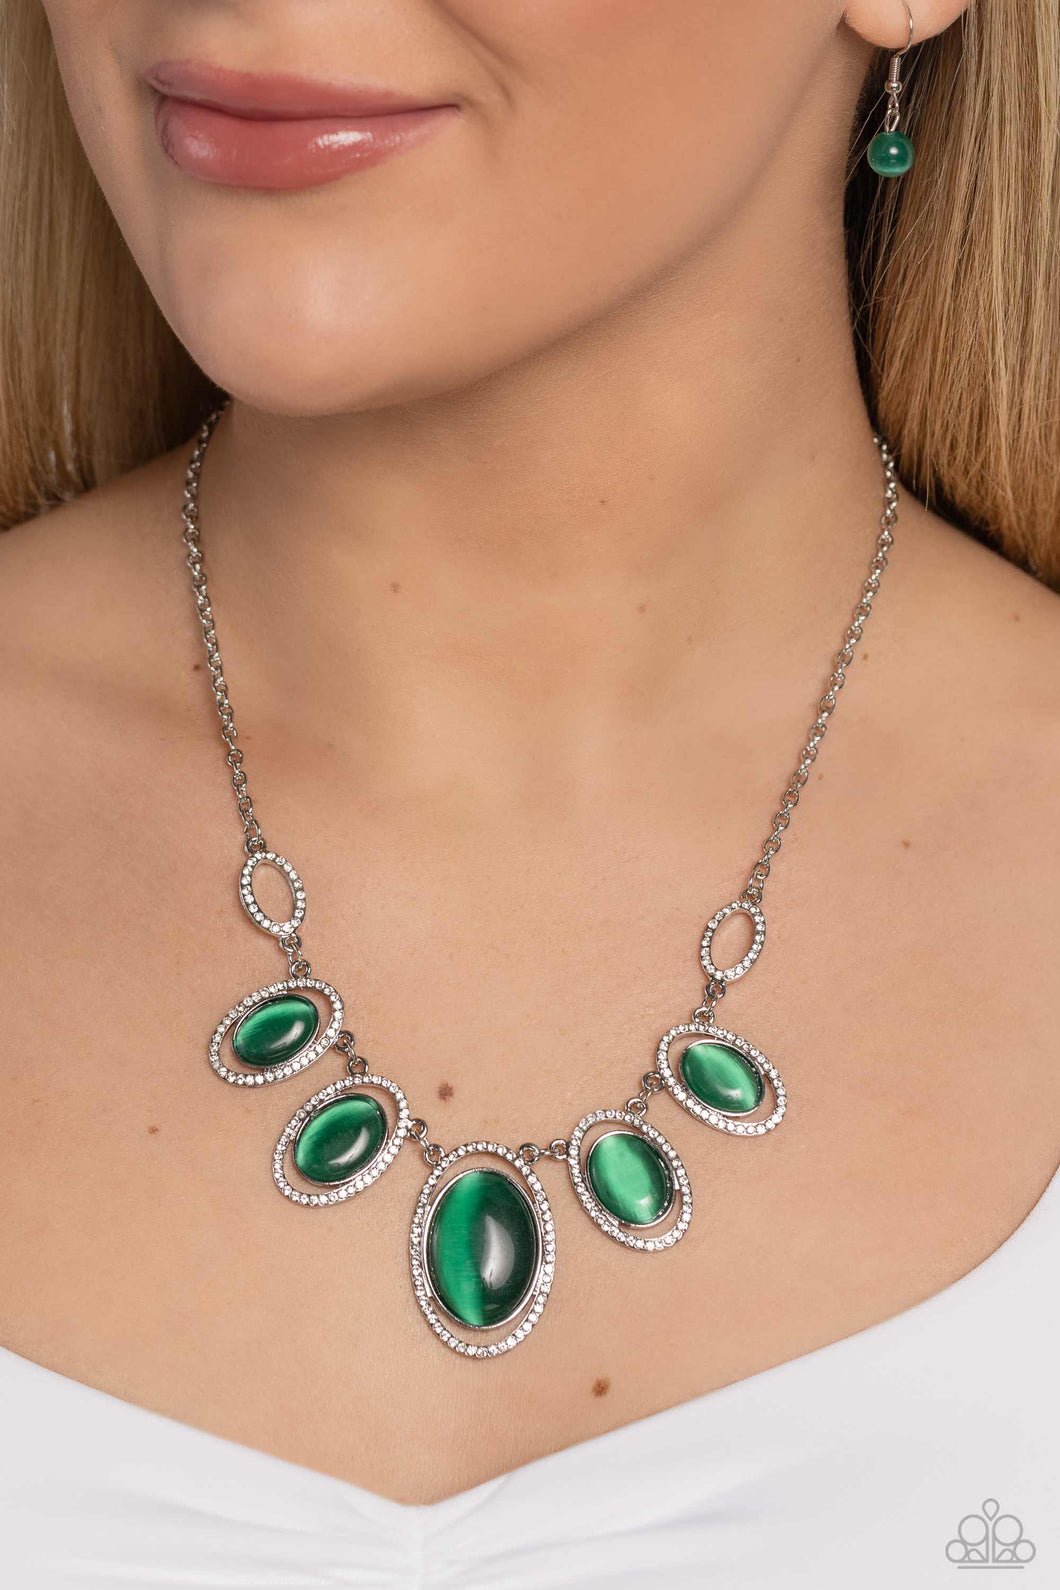 Paparazzi “A BEAM Come True” Green Necklace Earring Set